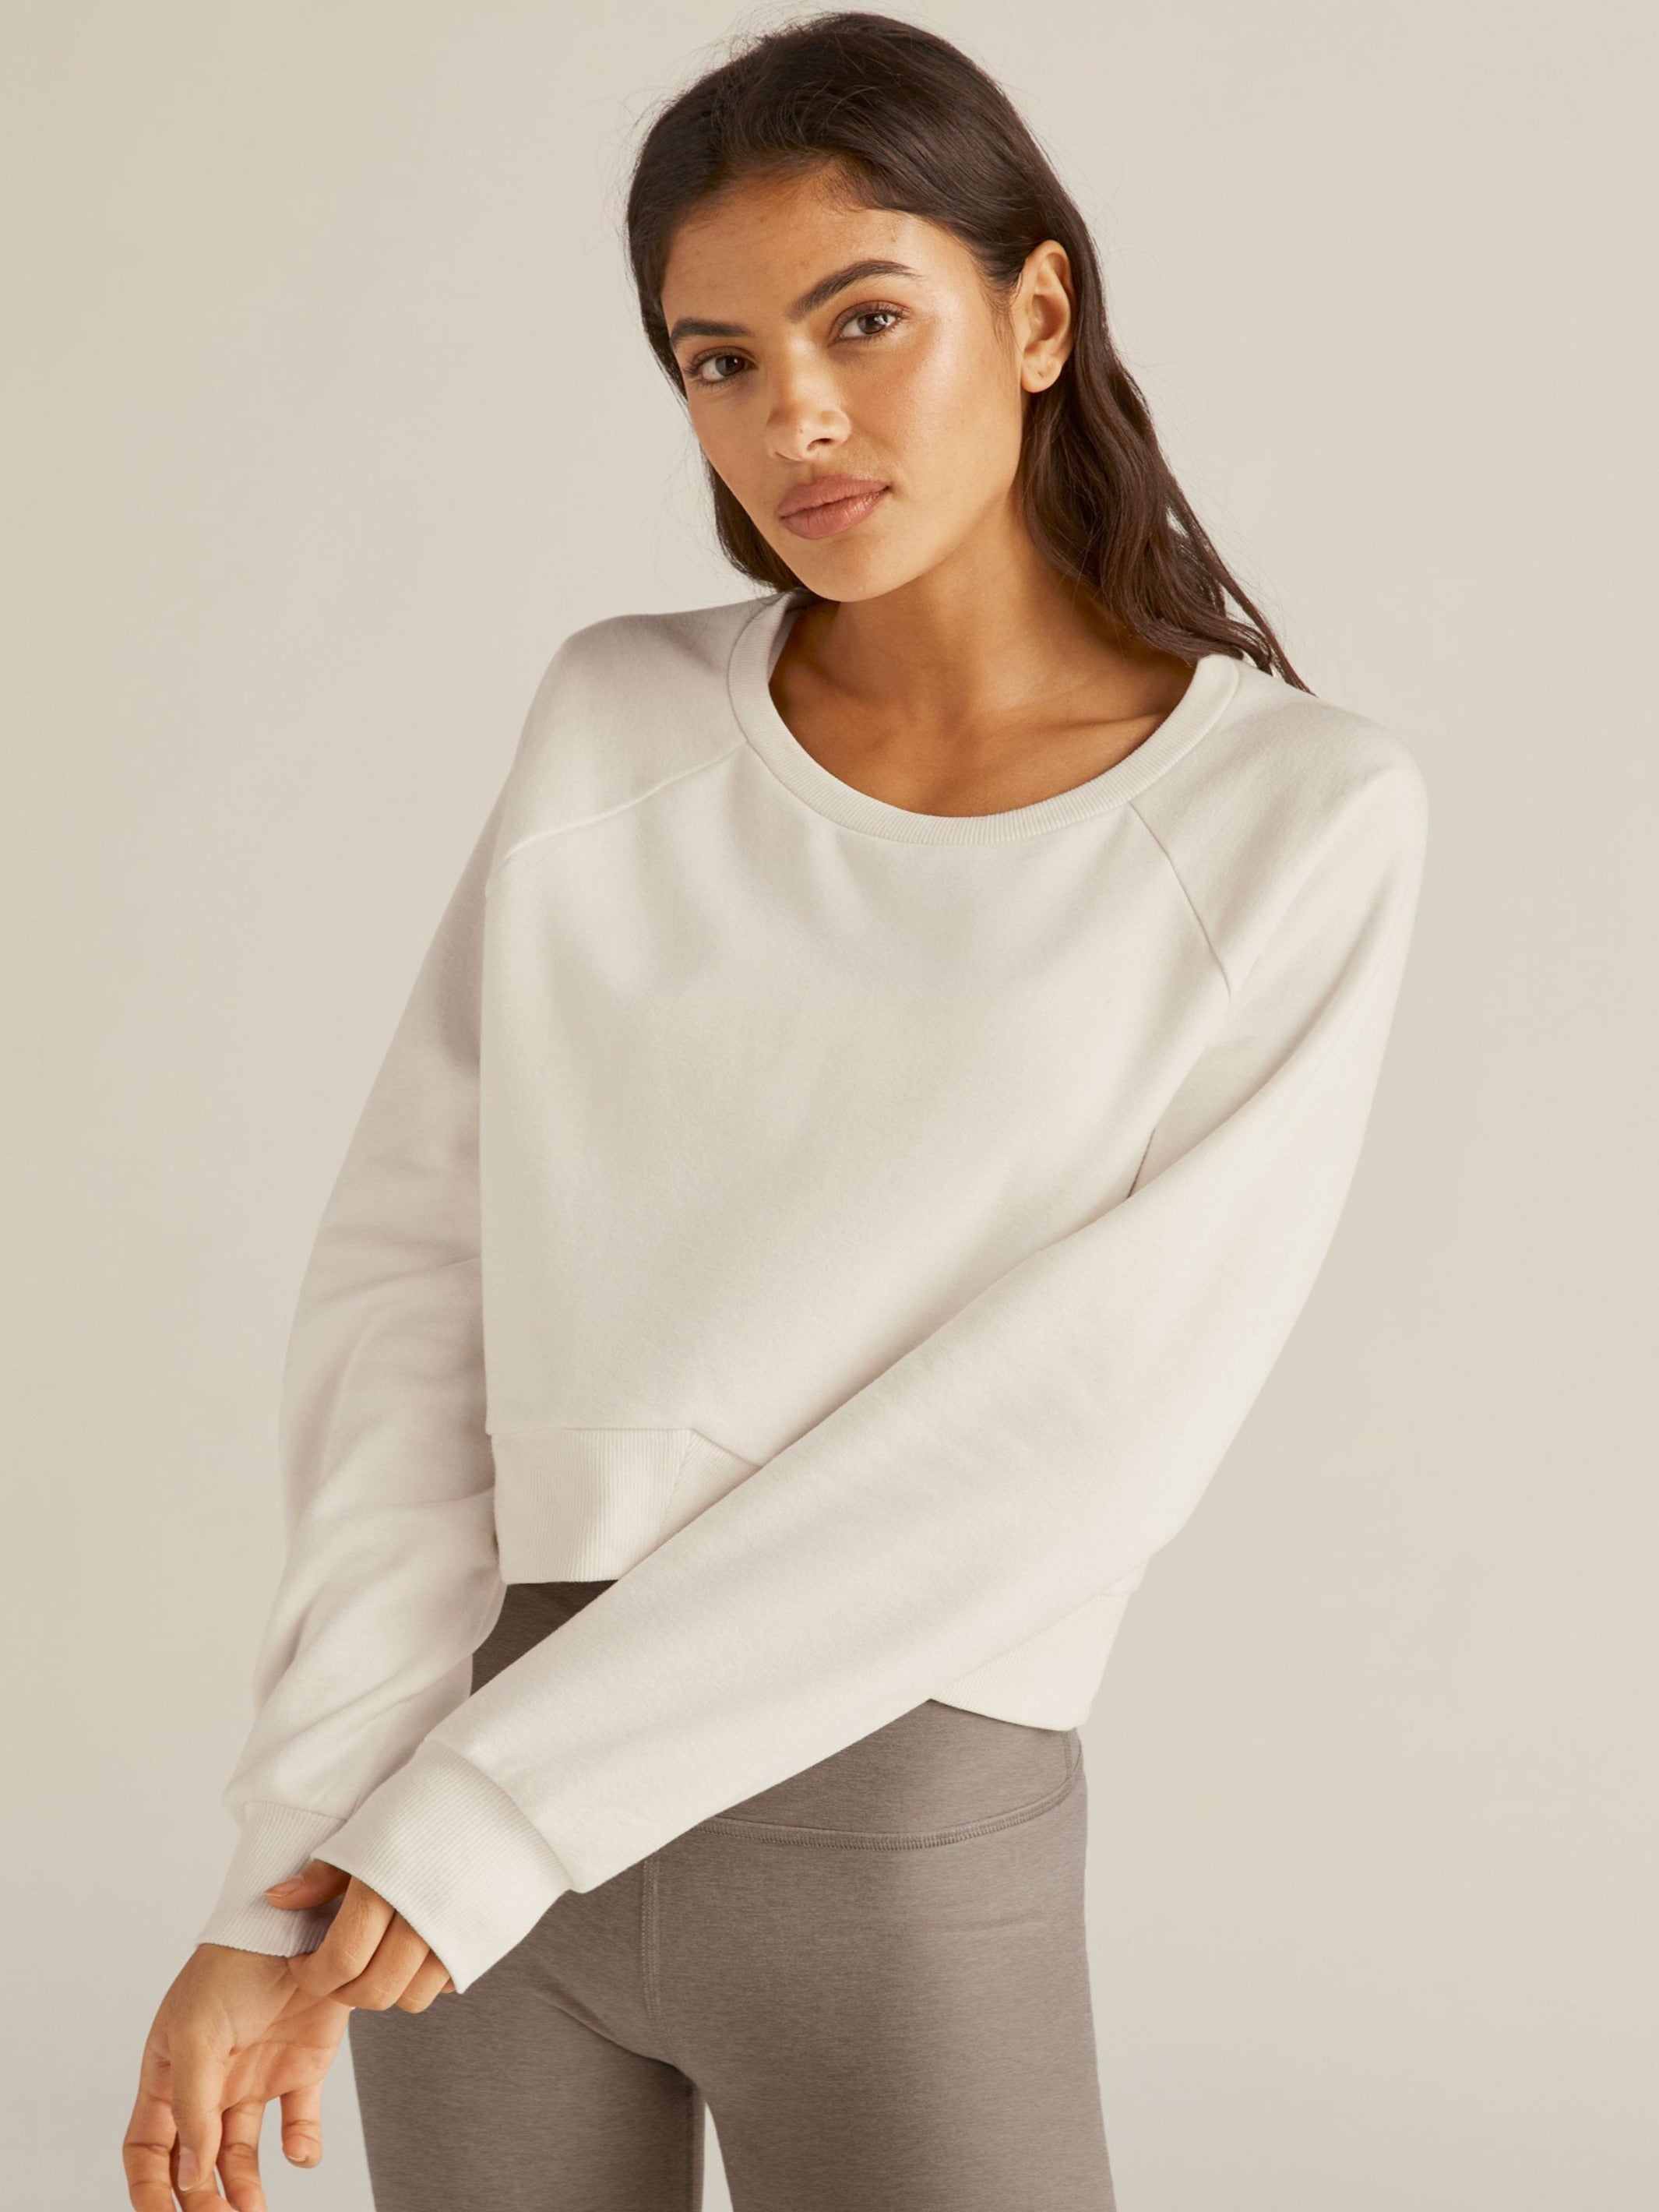 Beyond Yoga Uplift Cropped Pullover in Toffee